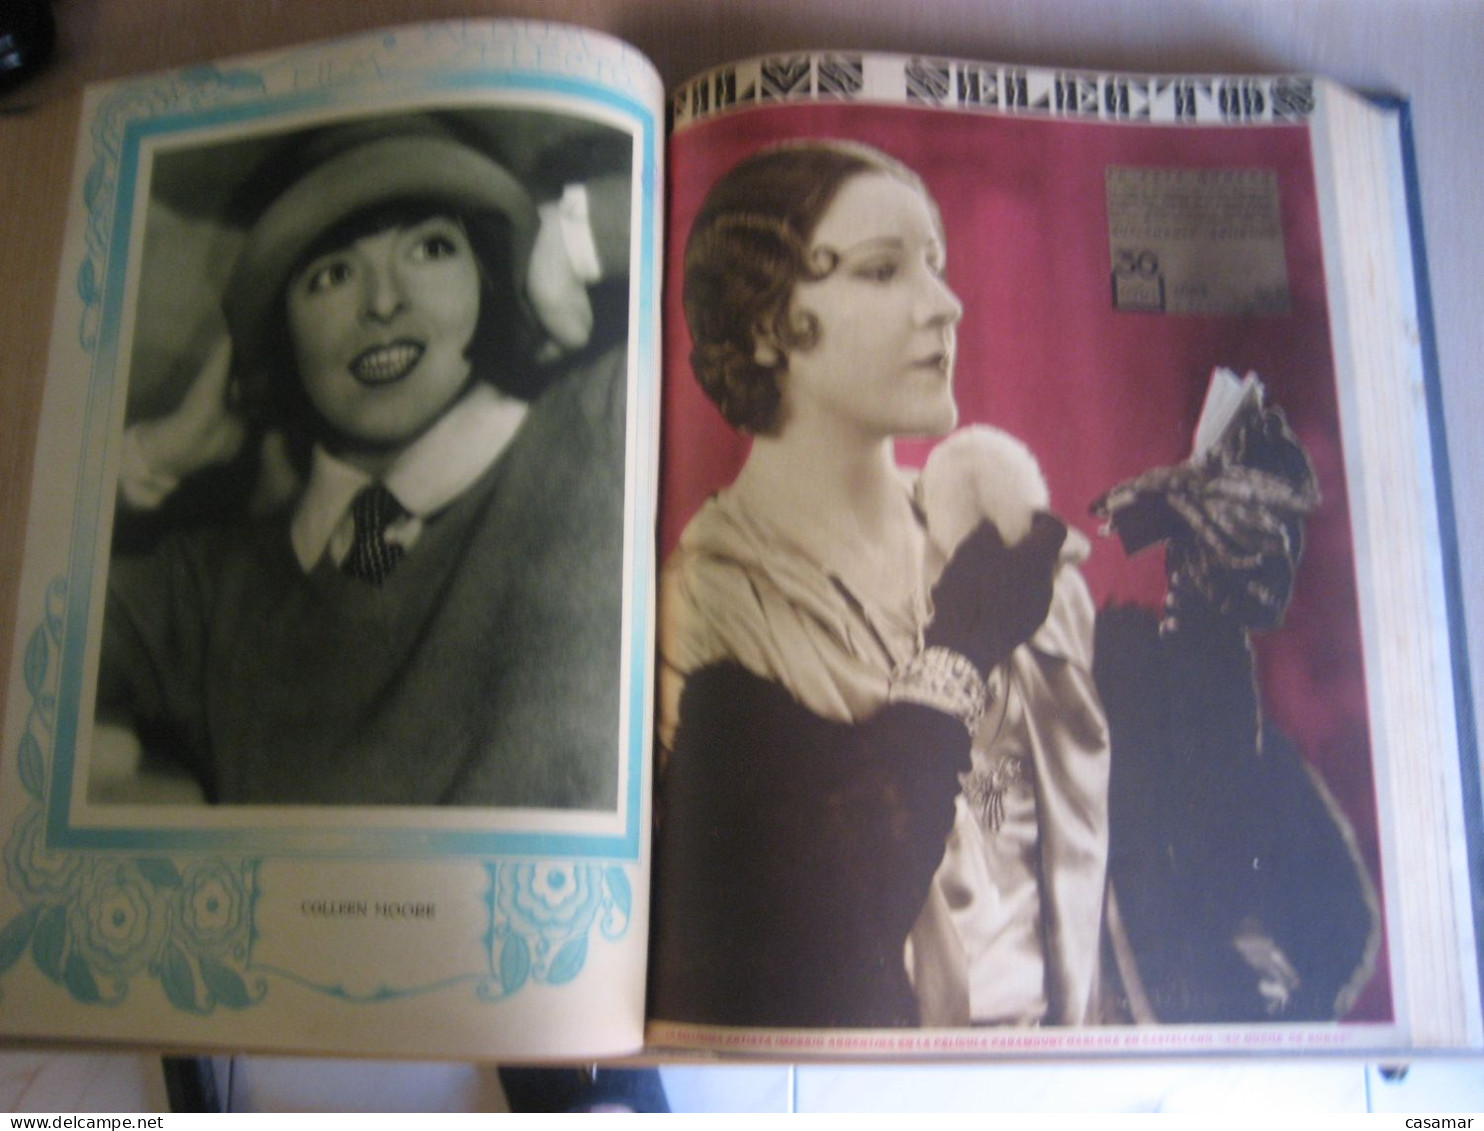 FILMS SELECTOS 12/37 1931 728 pgs. cine film cinema movie actor actress Weight +2kg CONSULT previously shipping costs